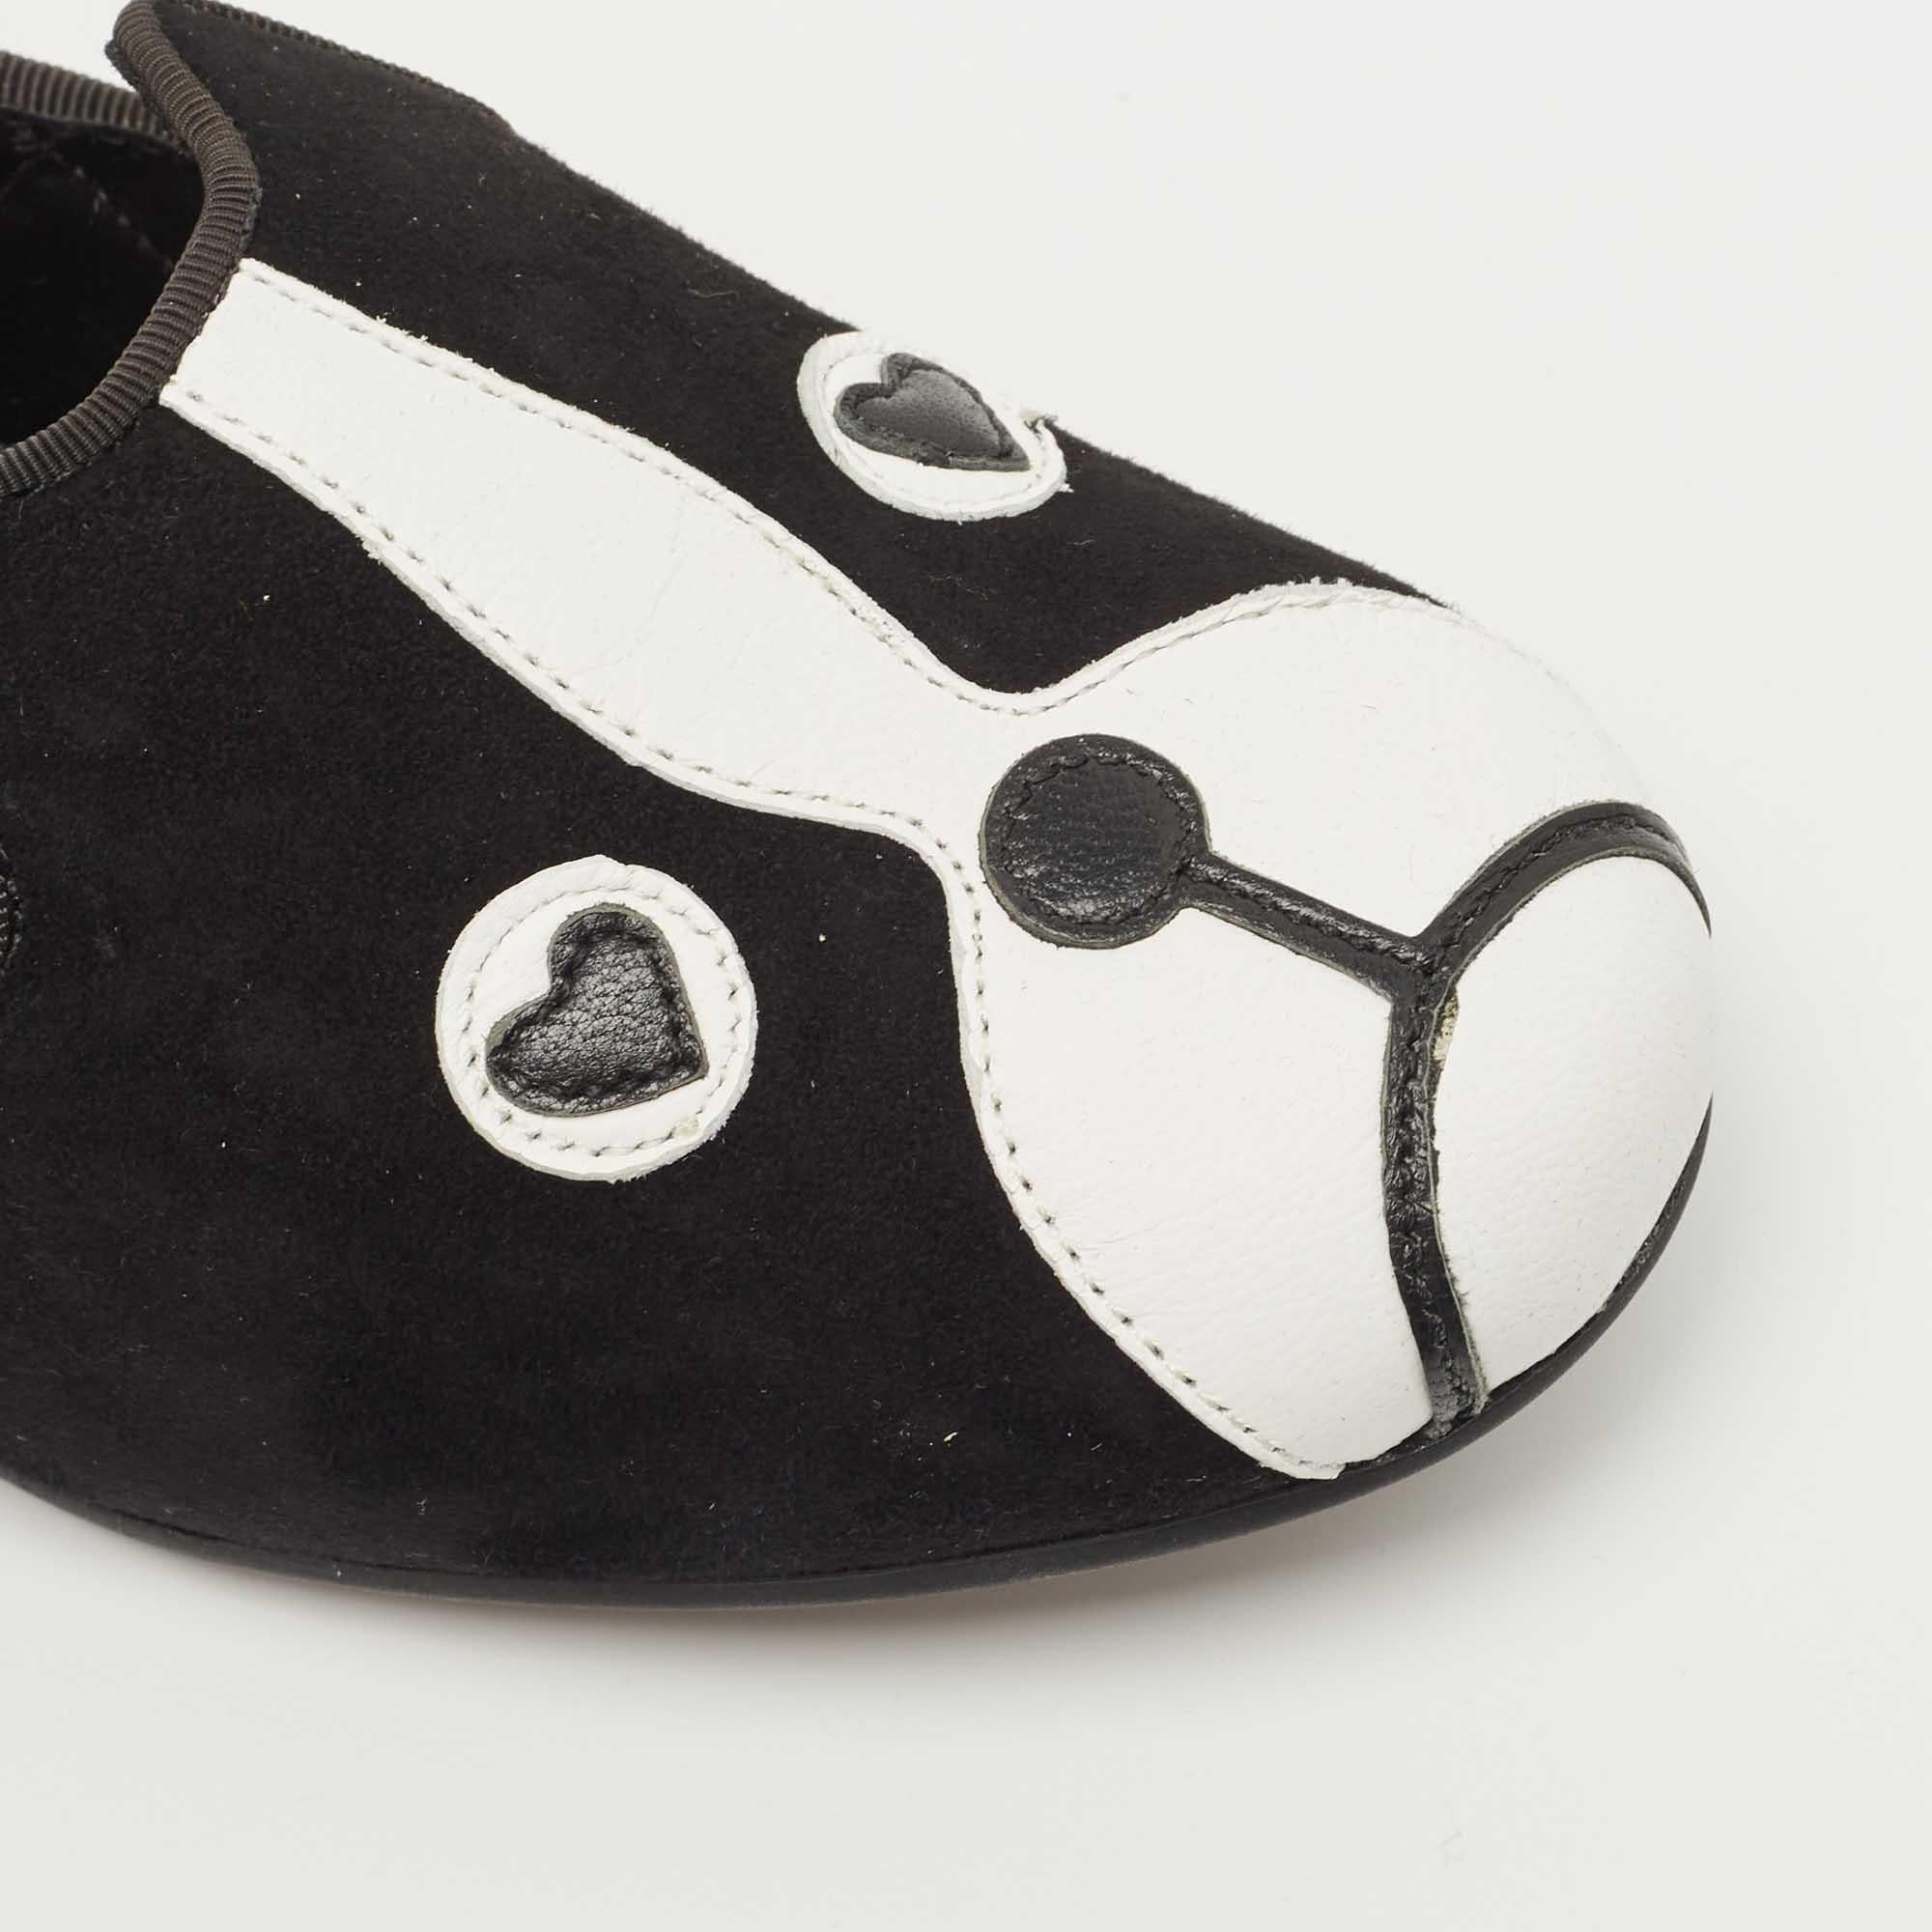 Marc by Marc Jacobs Black/White Suede and Leather Cat Ballet Flats Size 36 2